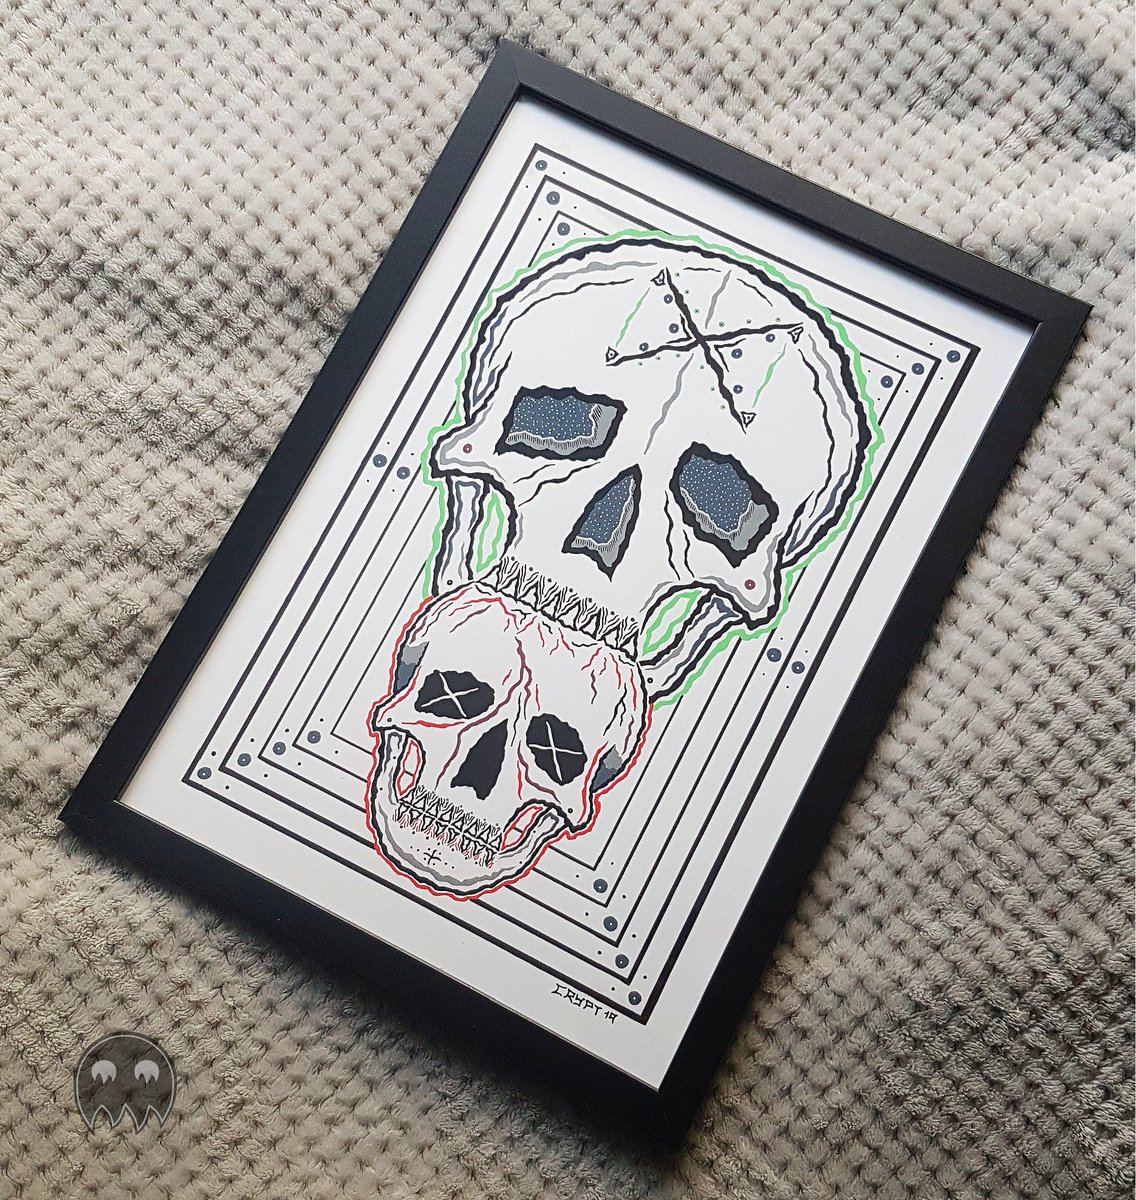 cannibals (a3)made around the same time as reptilian, can you tell i was listening to a lot of converge at the time? https://robcryptx.bigcartel.com/product/cannibals-jaggy-skull-painting-a3